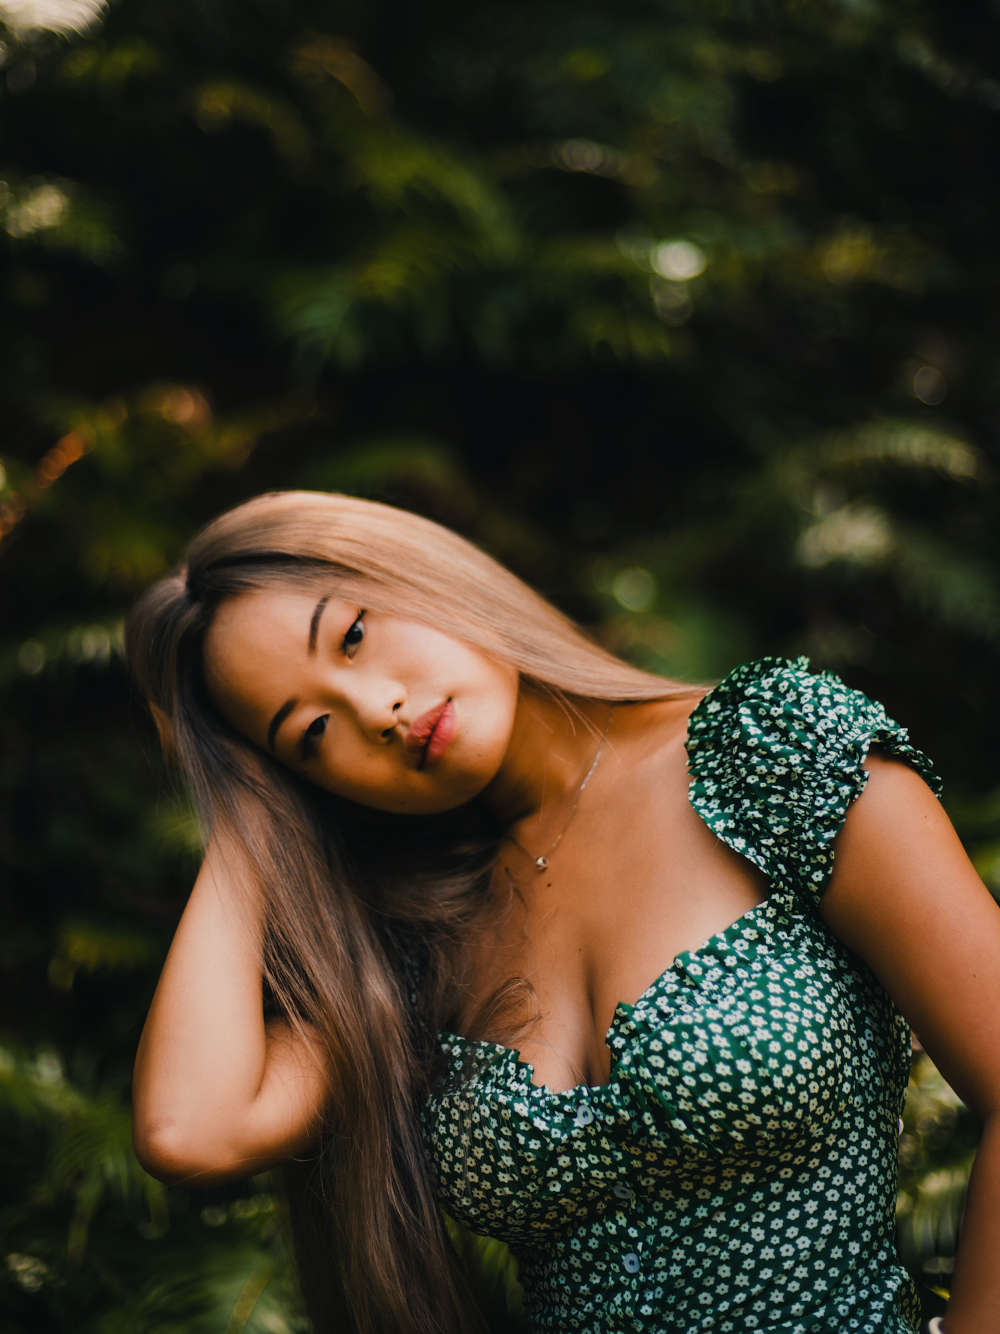 Lifestyle photo of a woman in a forest in Hong Kong